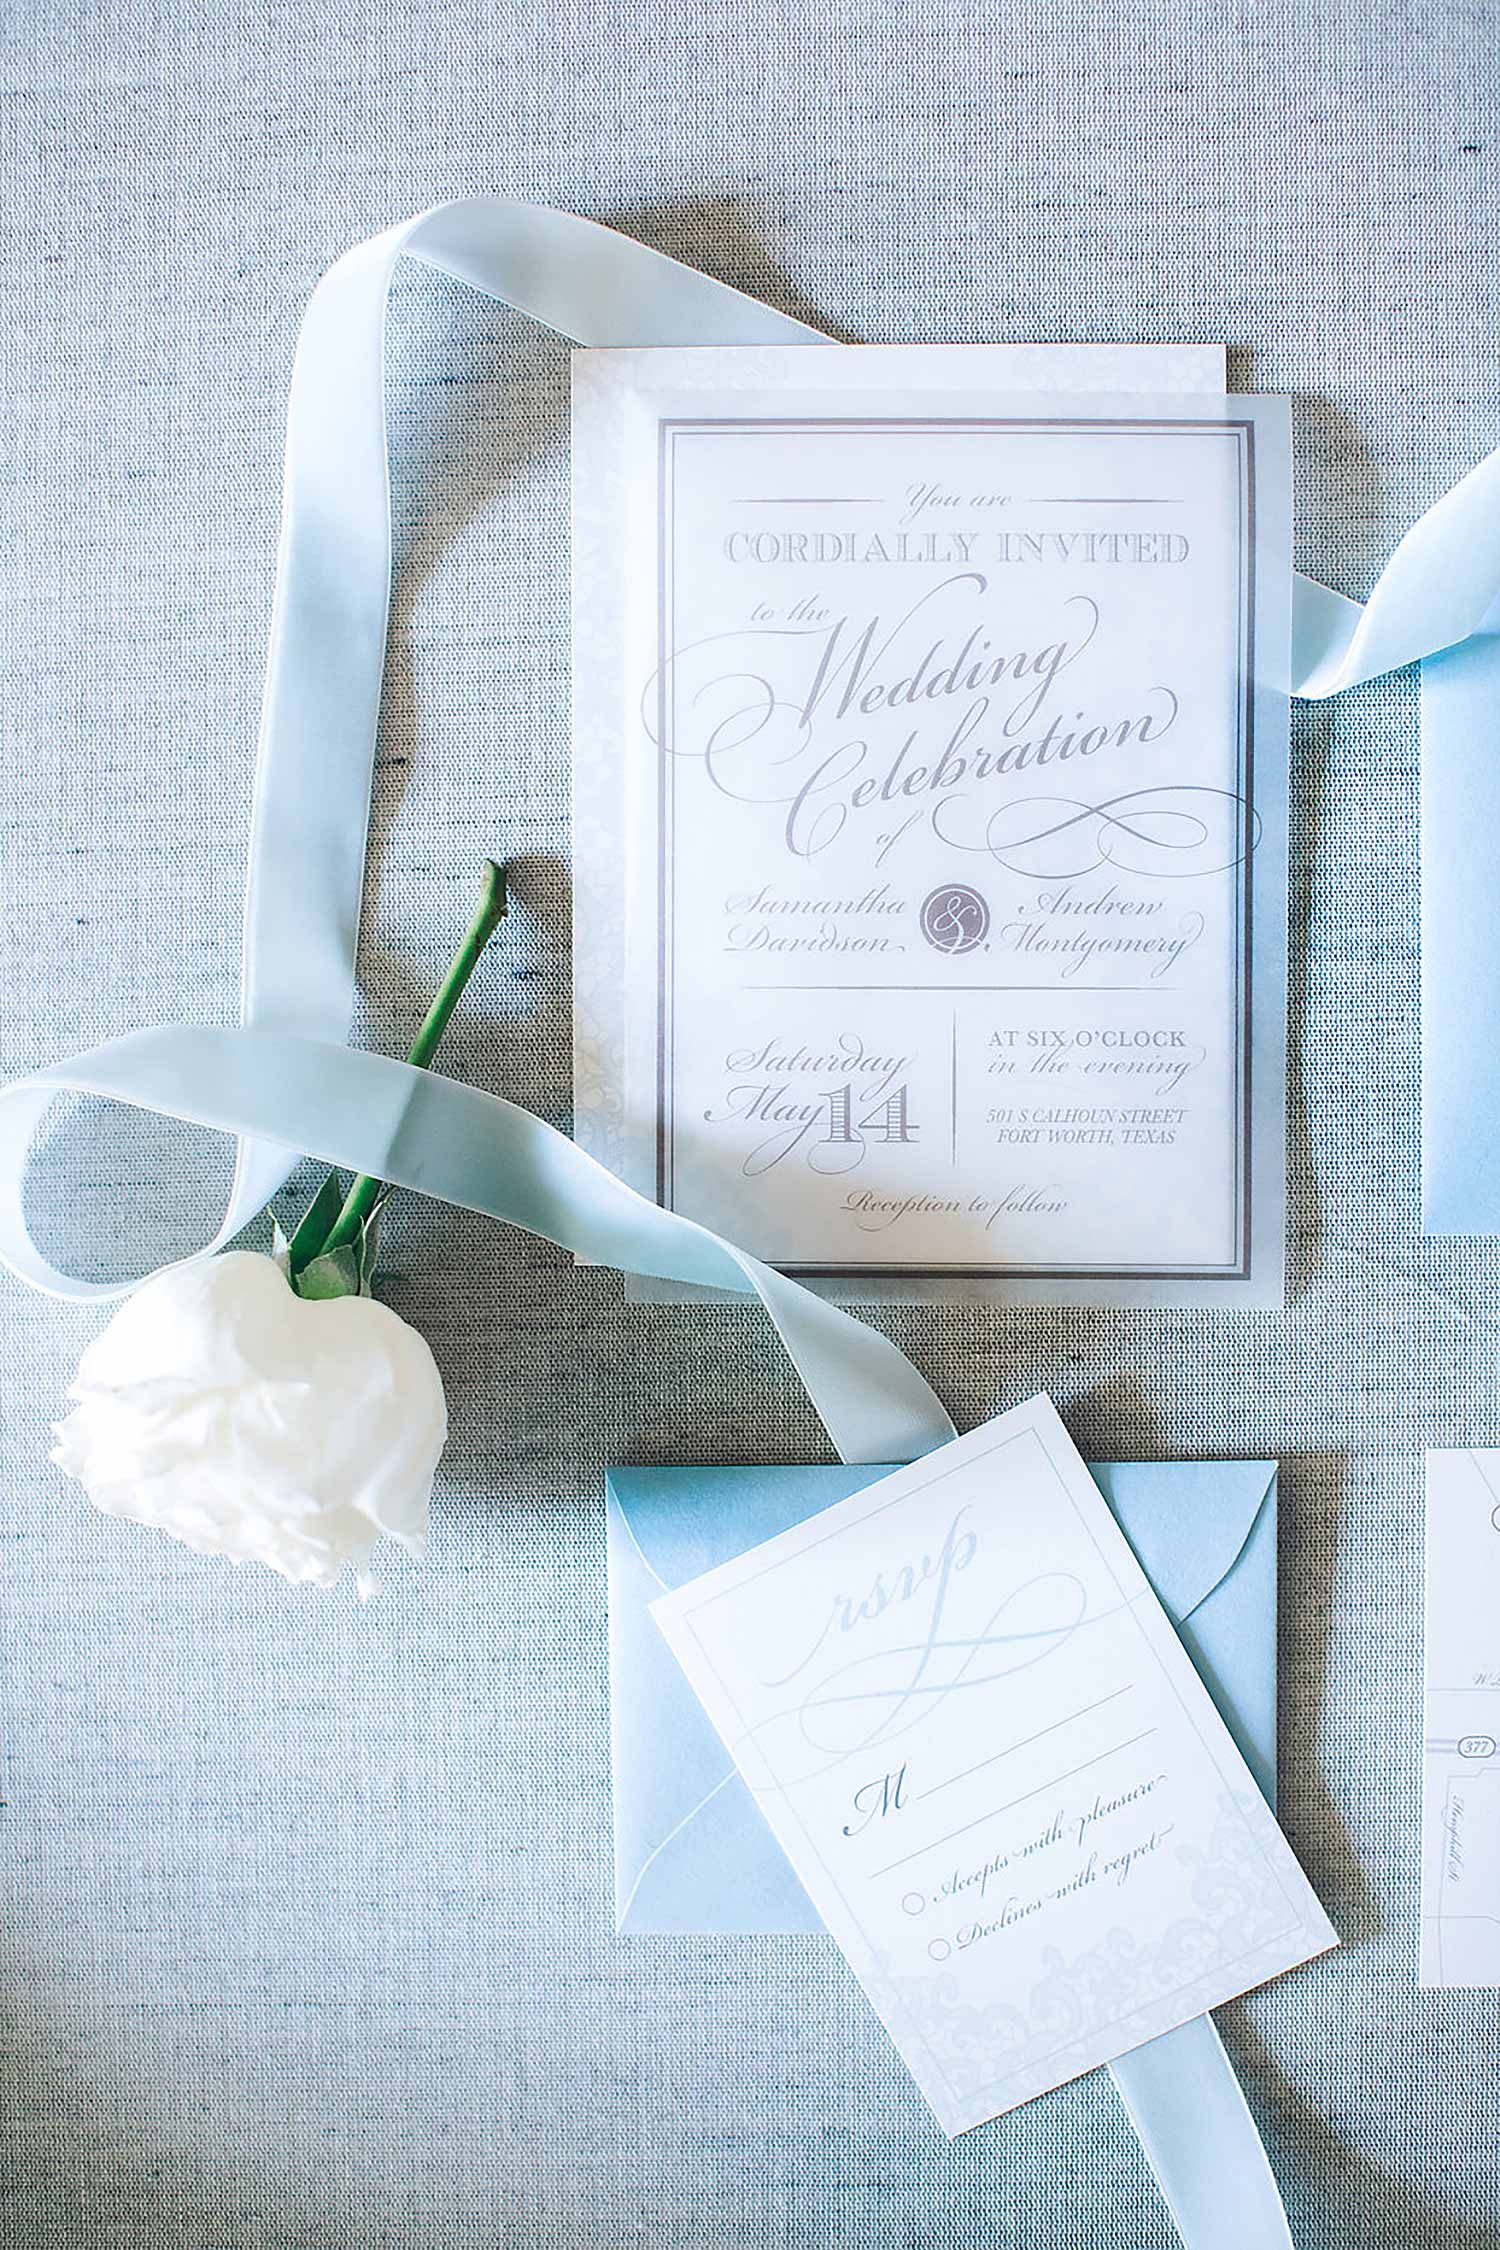 Acrylic wedding inviation and dusty blue envelope with a white rose